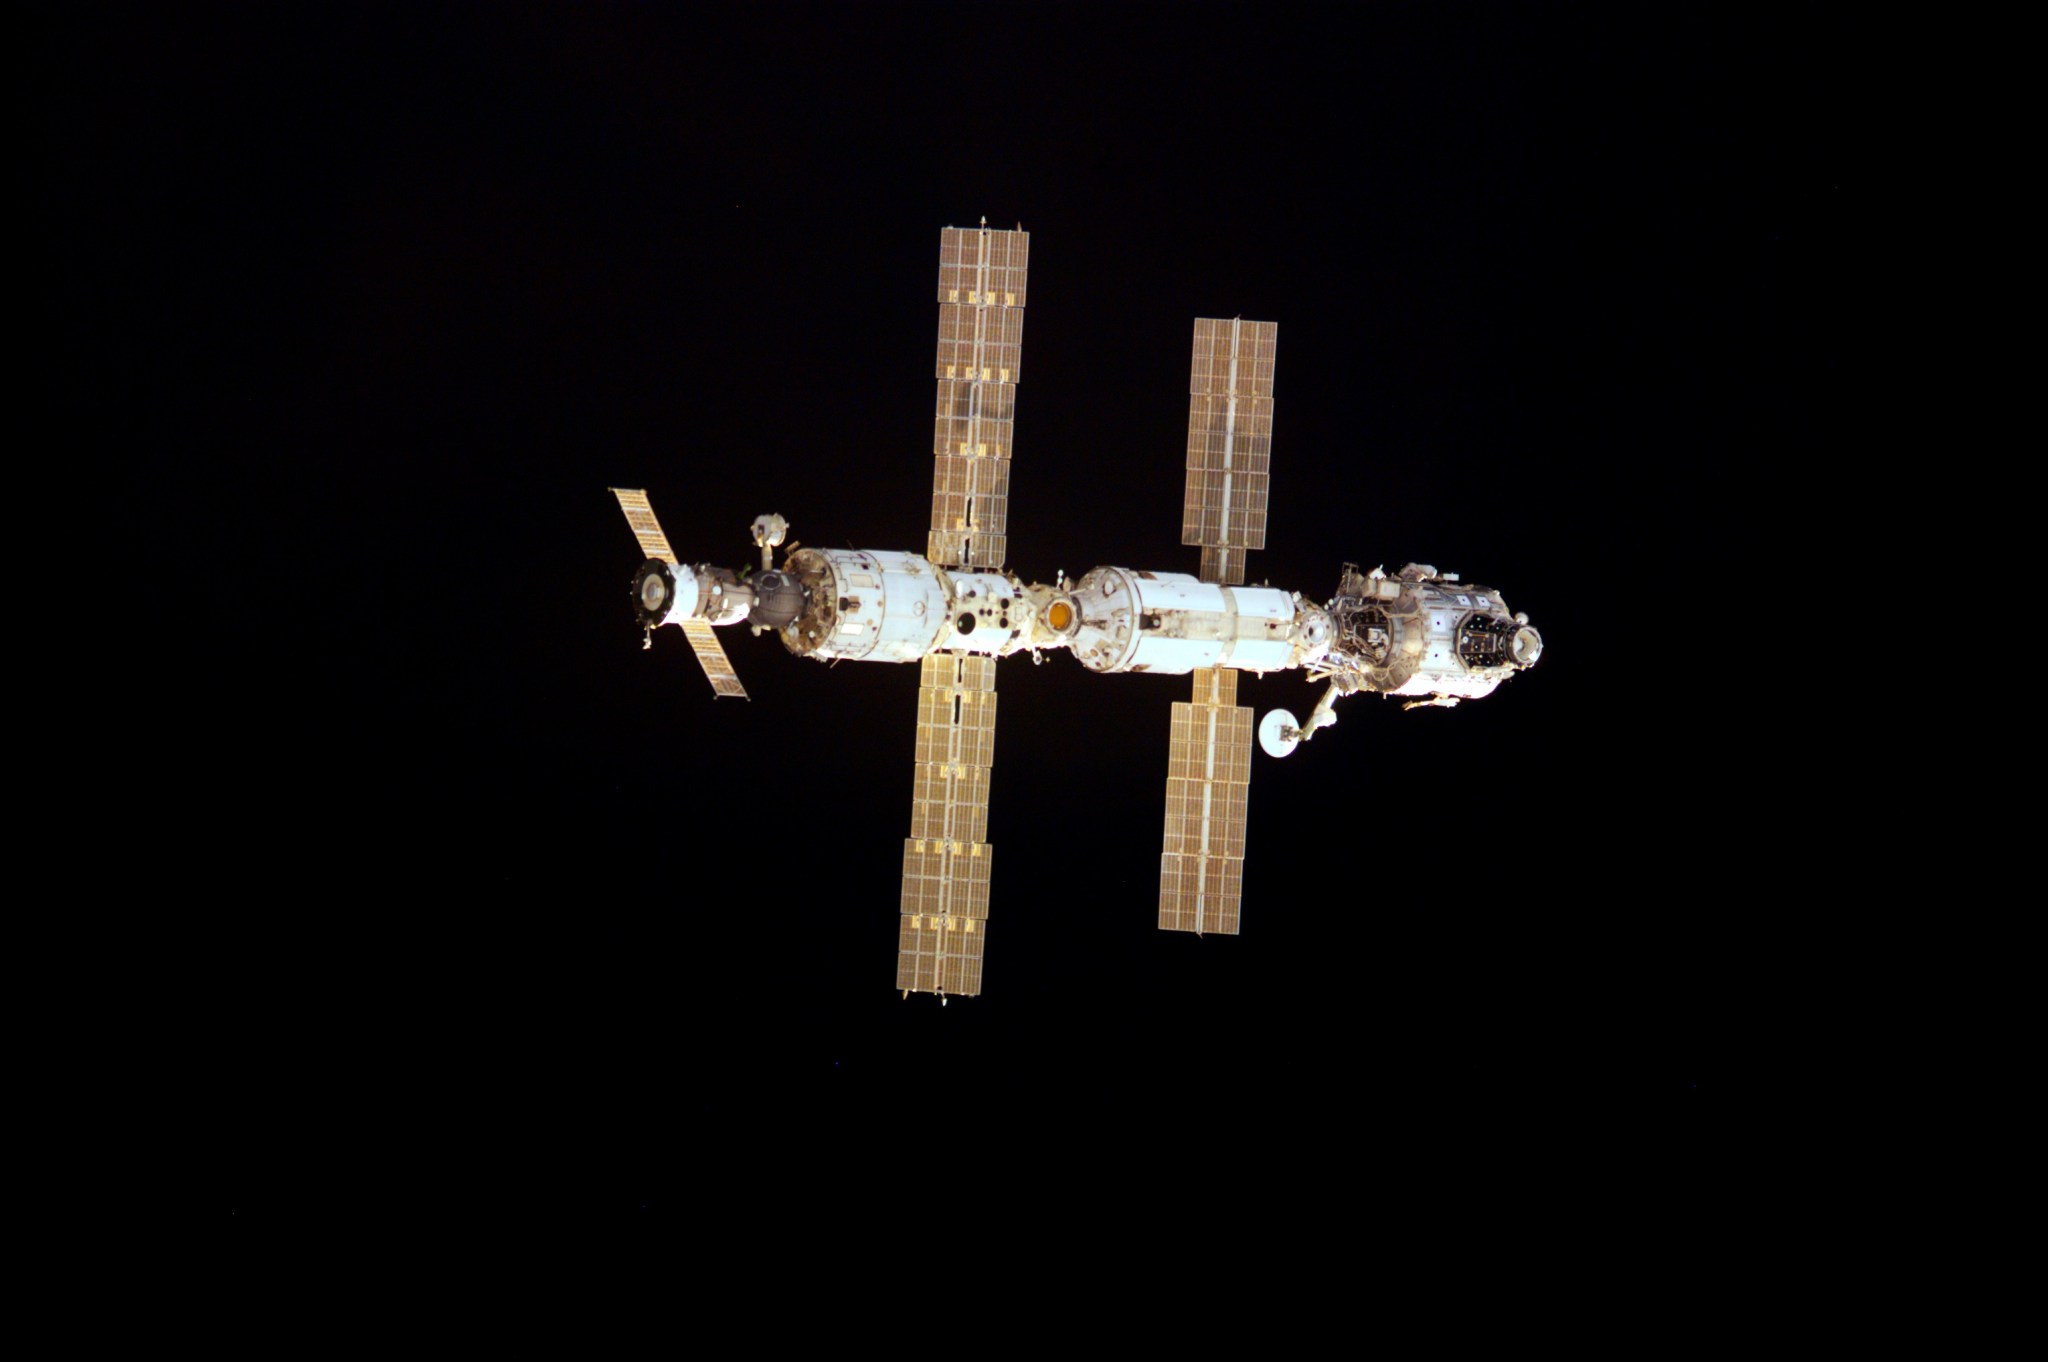 Space station with solar arrays deployed.